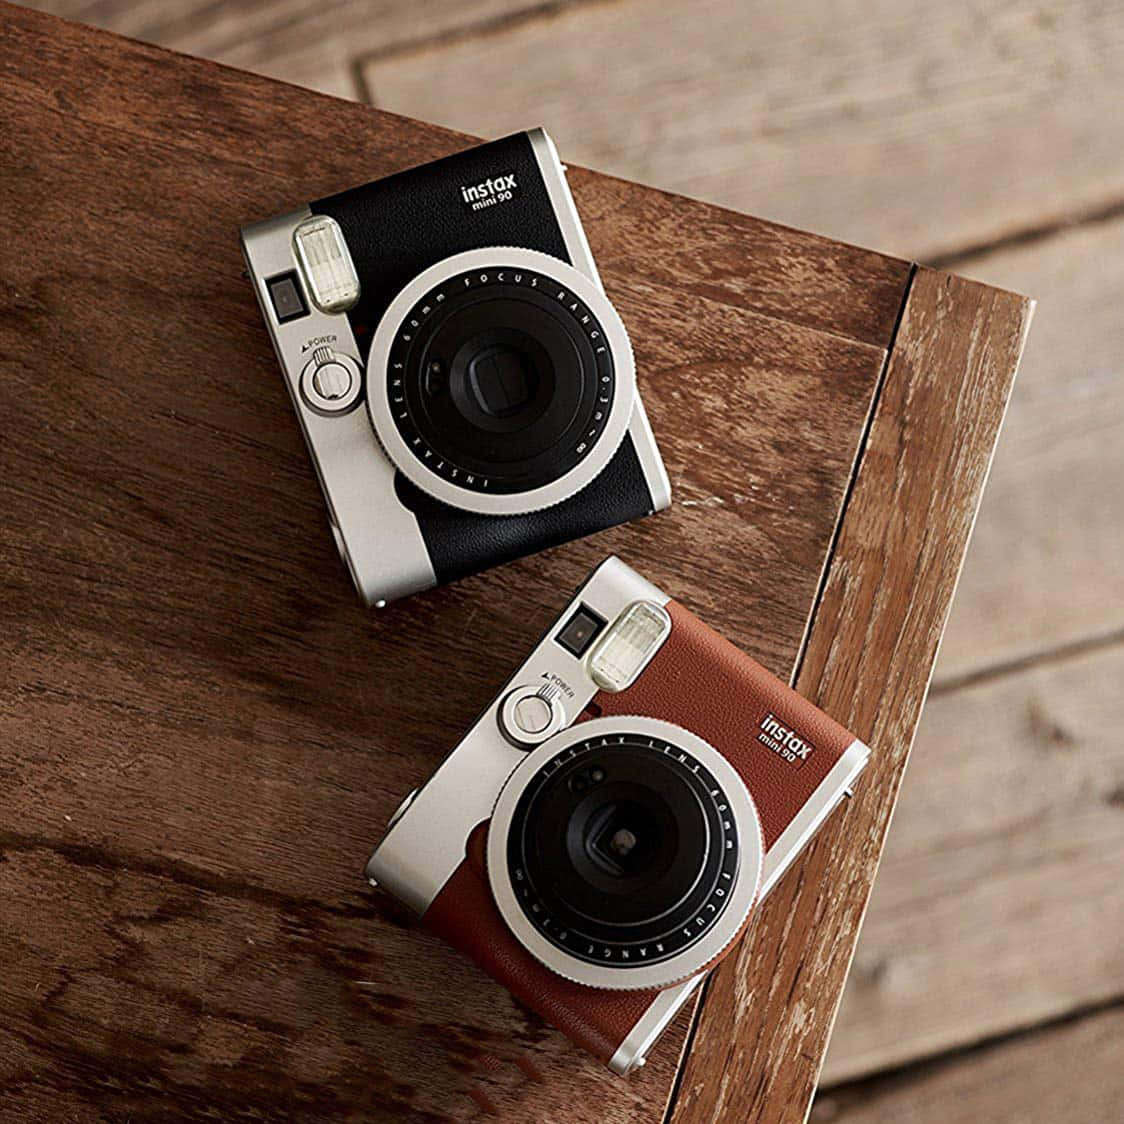 Capture High Quality Moments with the Latest Camera Technology